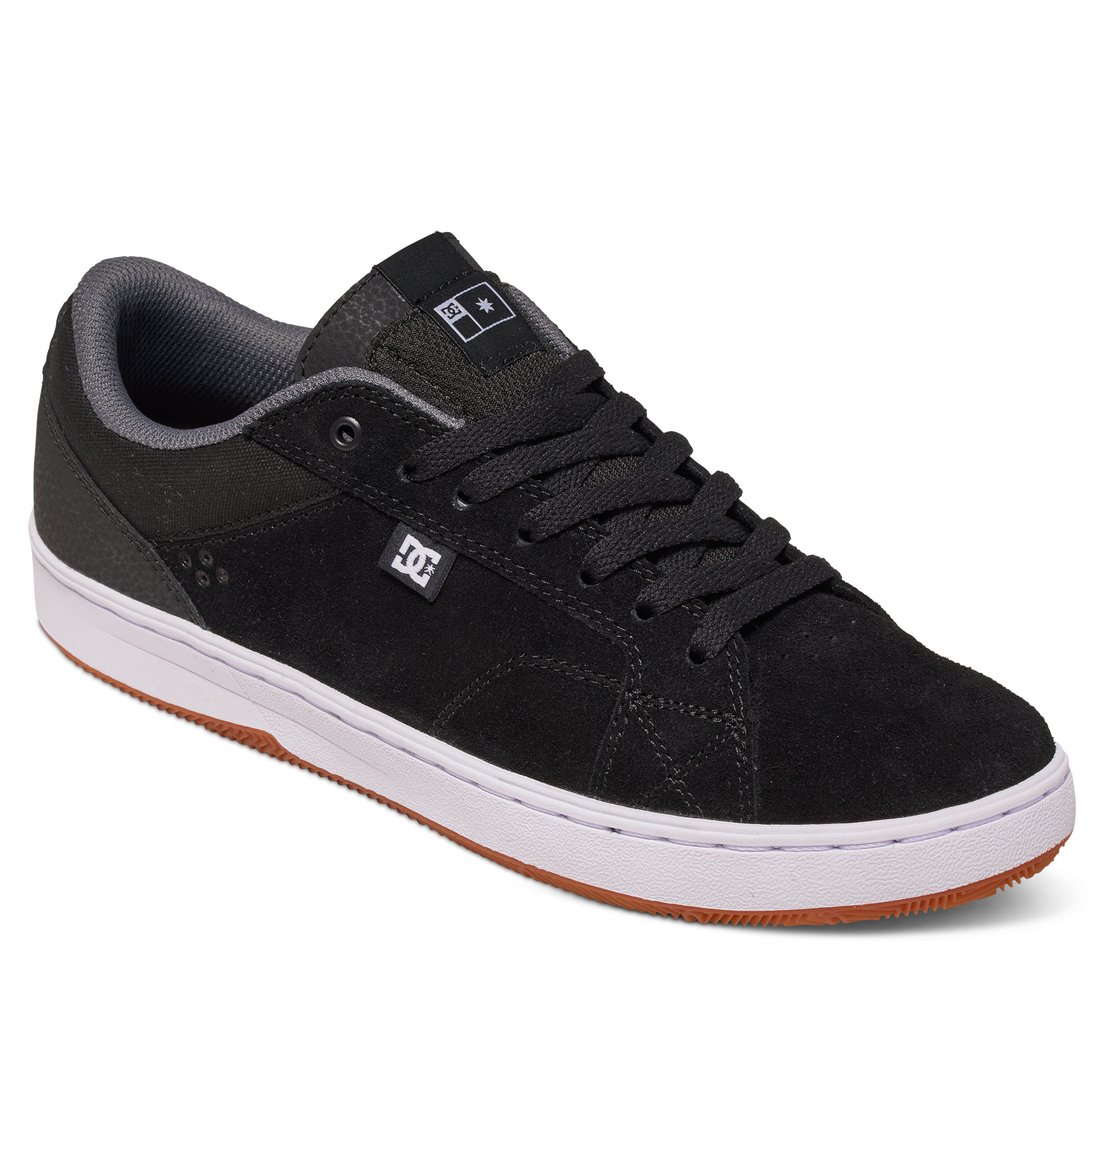 Astor S - Skate Shoes ADYS100375 | DC Shoes